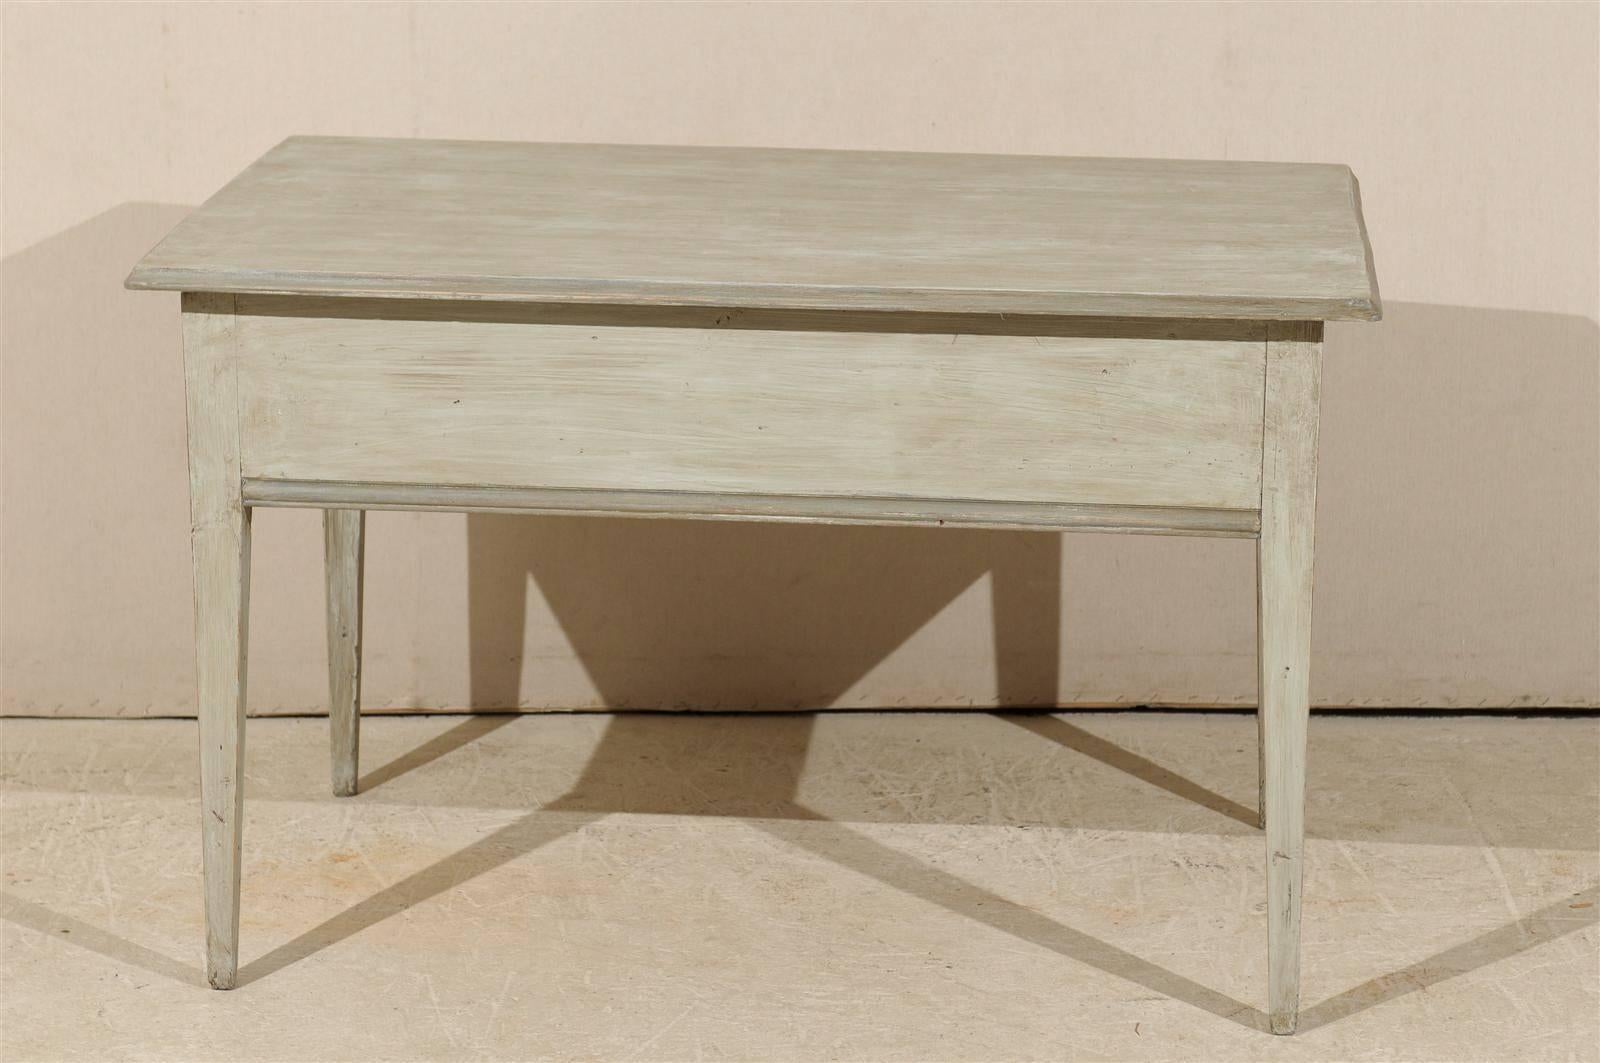 A Swedish 19th century painted wood side table with single drawer, tapered legs and clean lines.